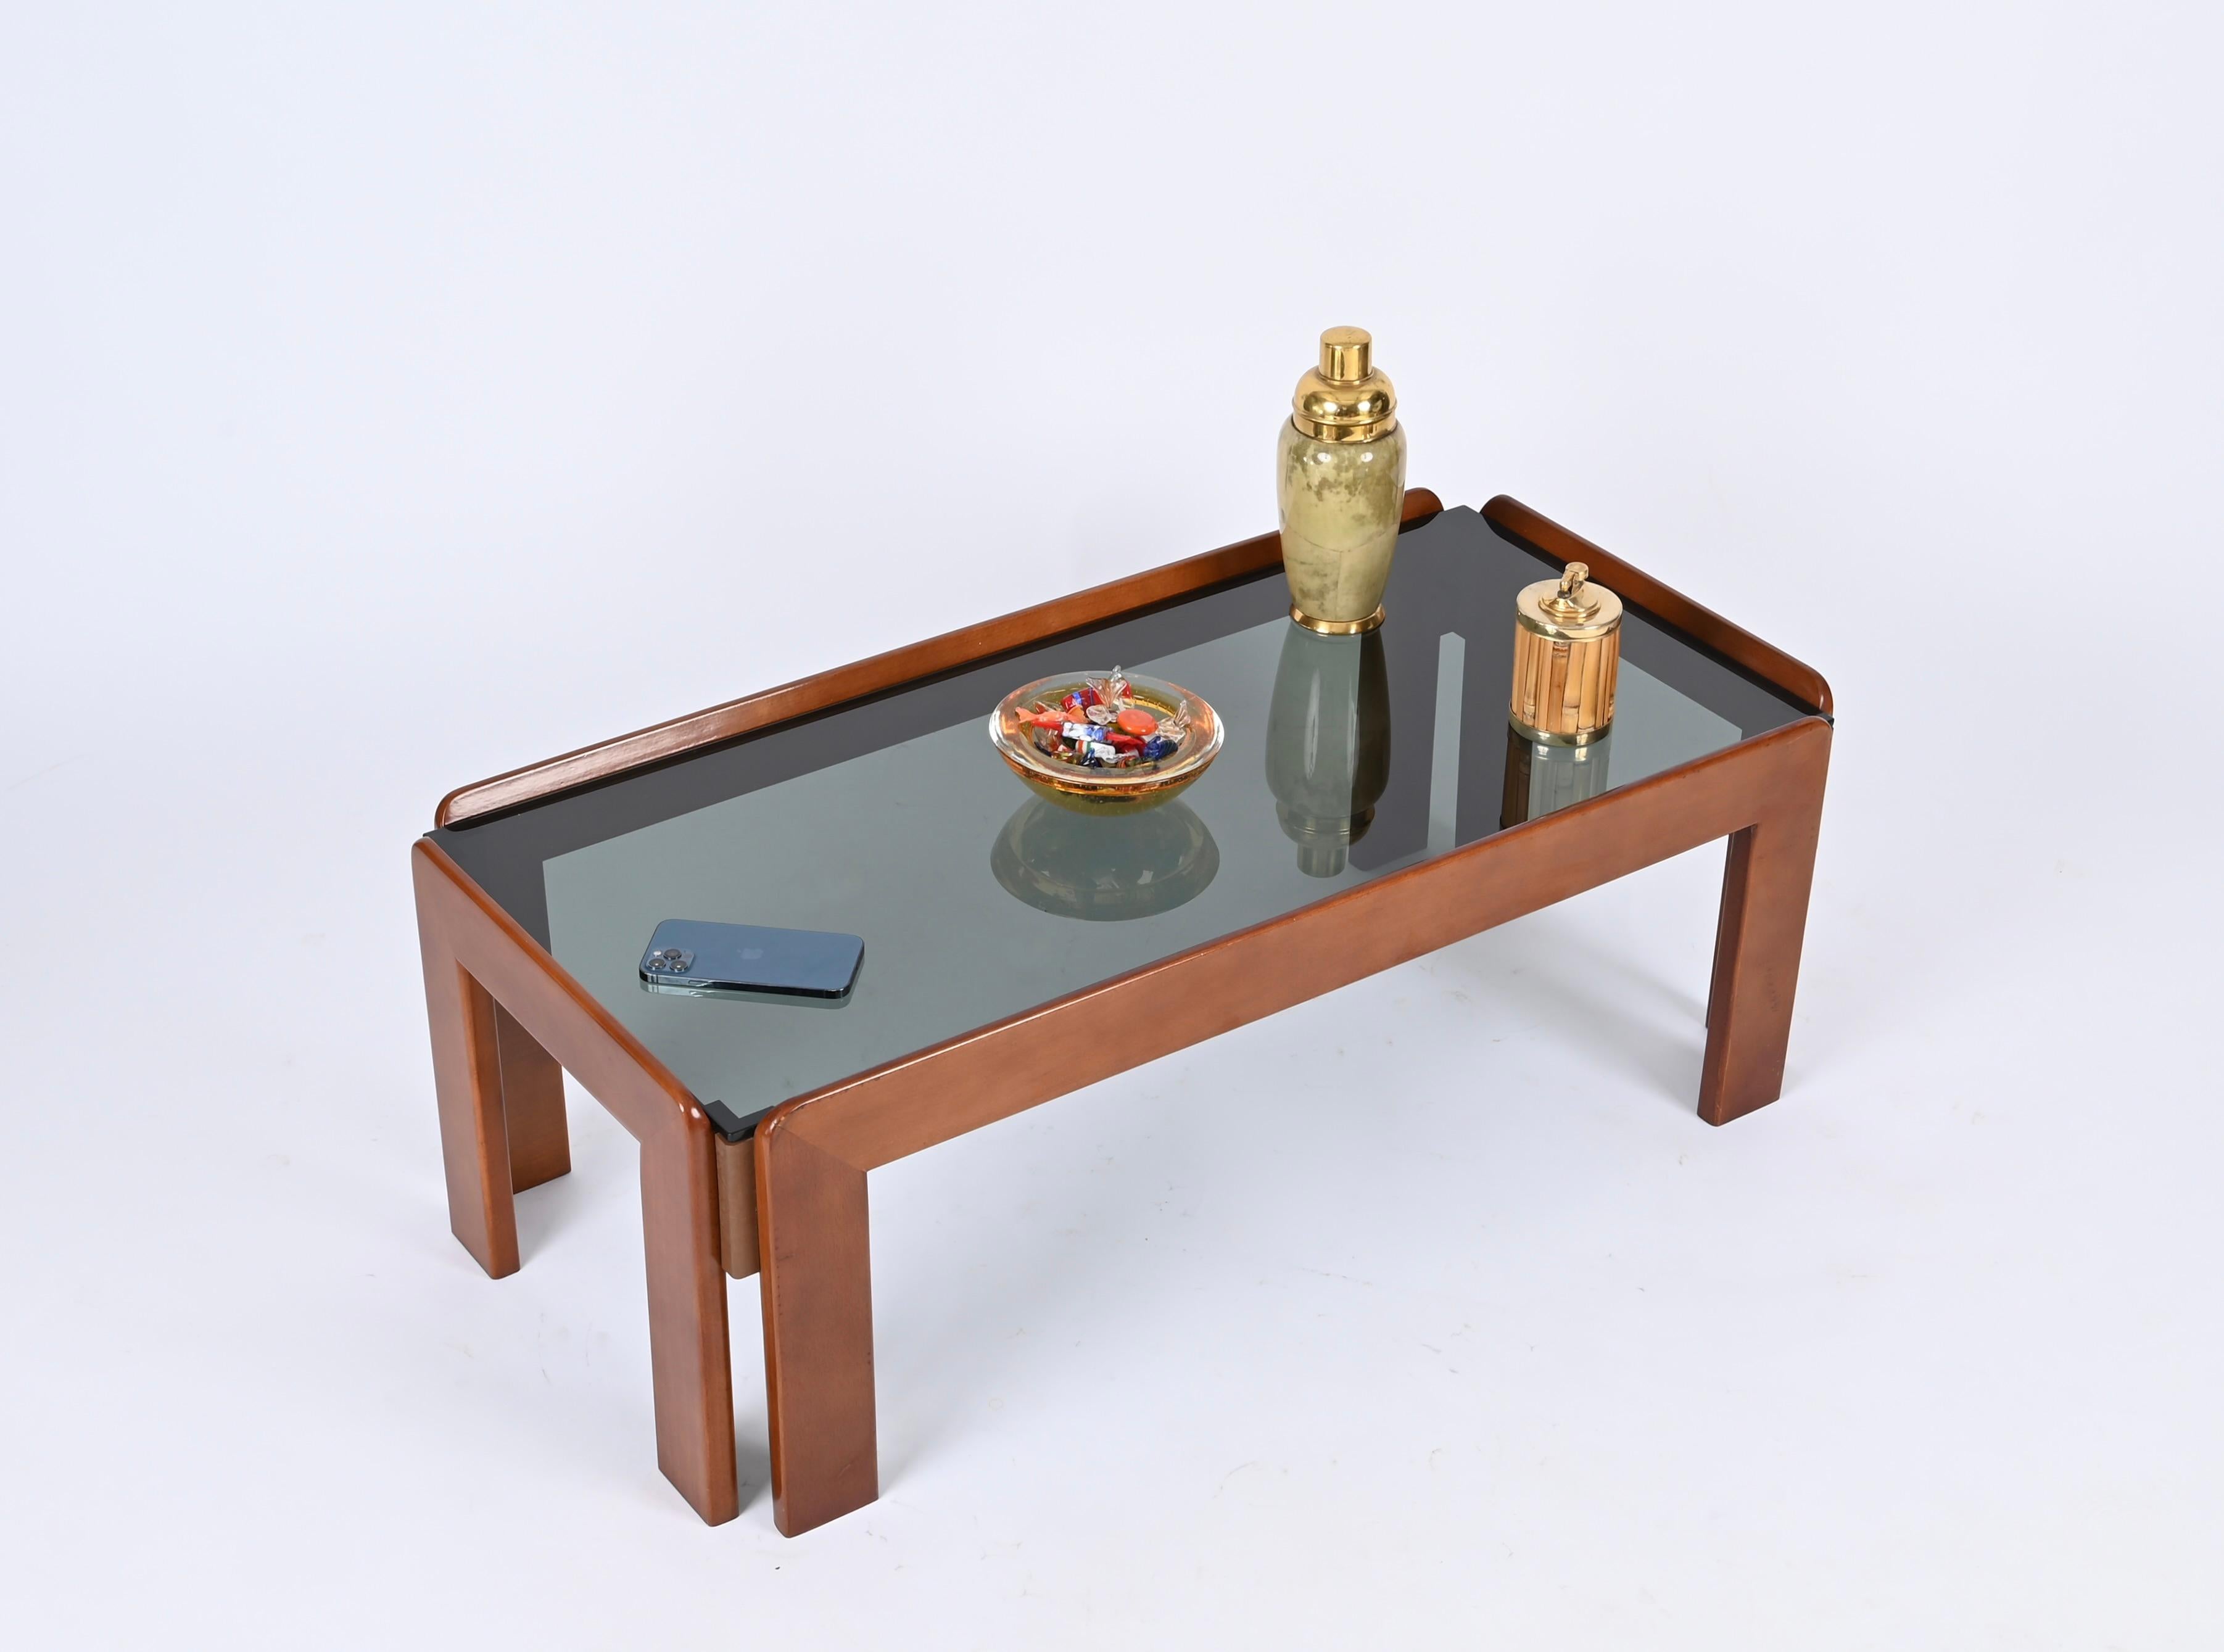 Tobia Scarpa Rectangular Walnut Coffee Table with Smoked Glass, Italy 1960s For Sale 5